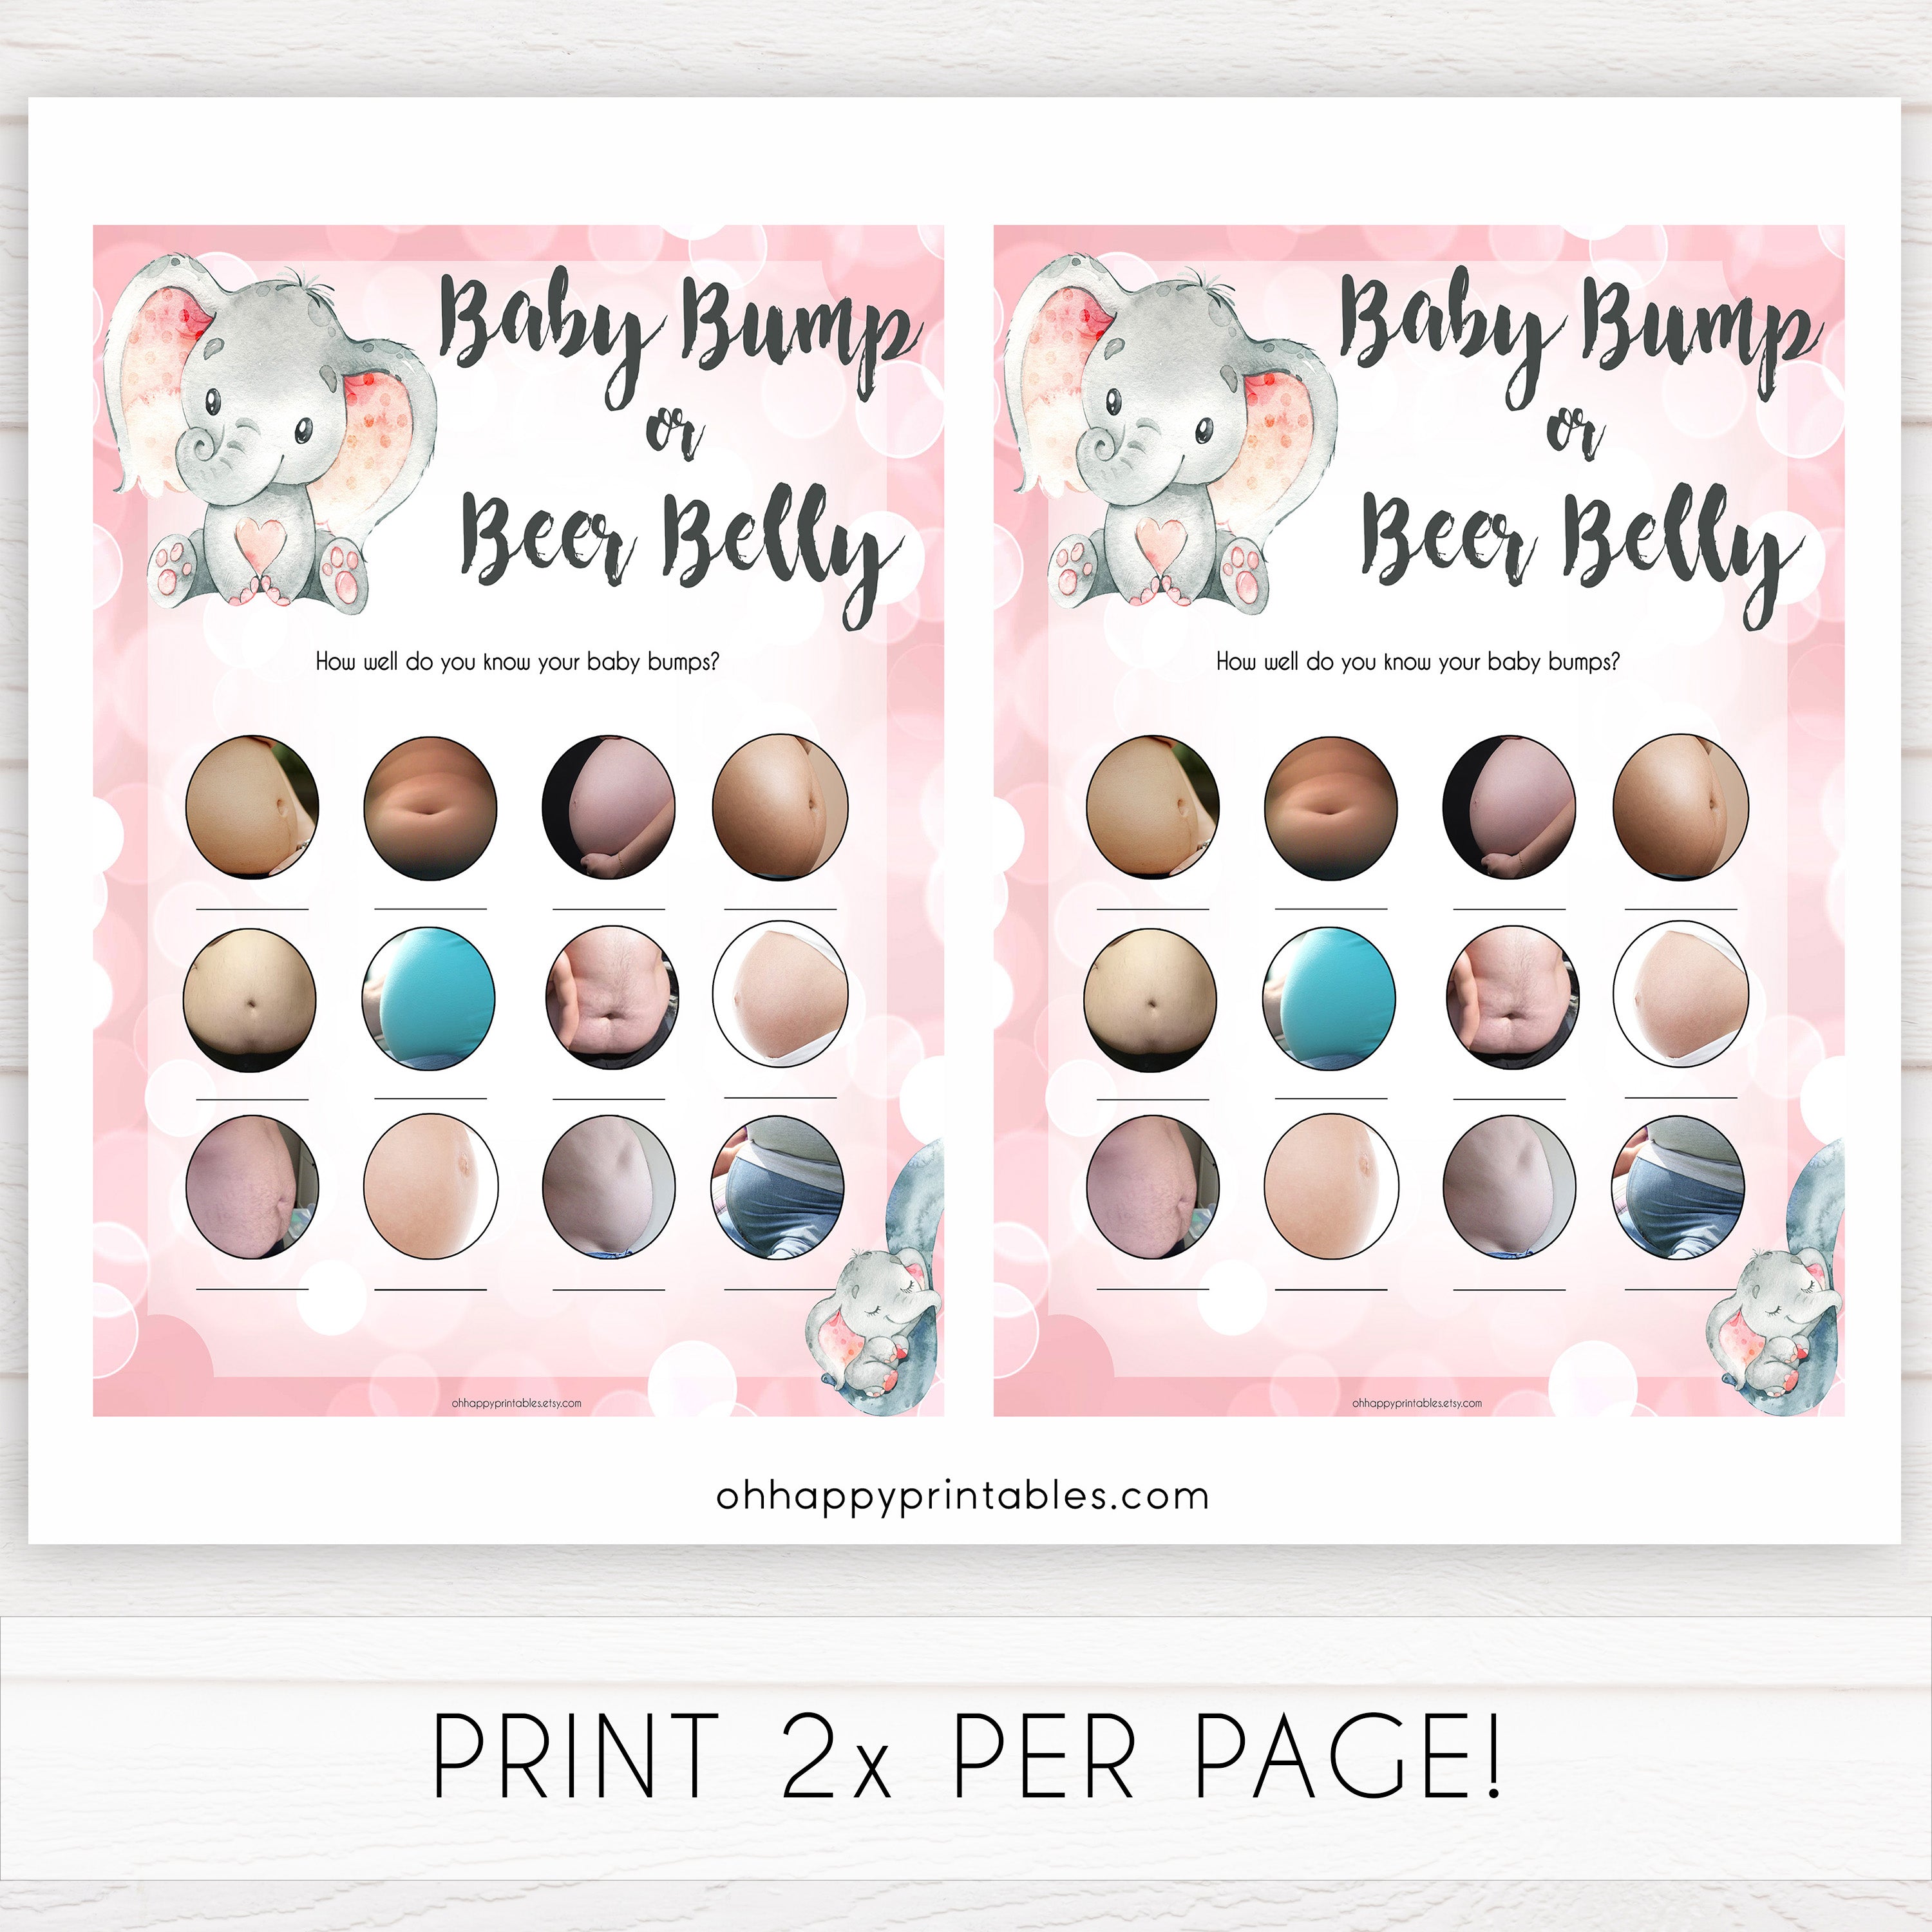 pink elephant baby games, baby bump or beer belly baby shower games, printable baby shower games, baby shower games, fun baby games, popular baby games, pink baby games